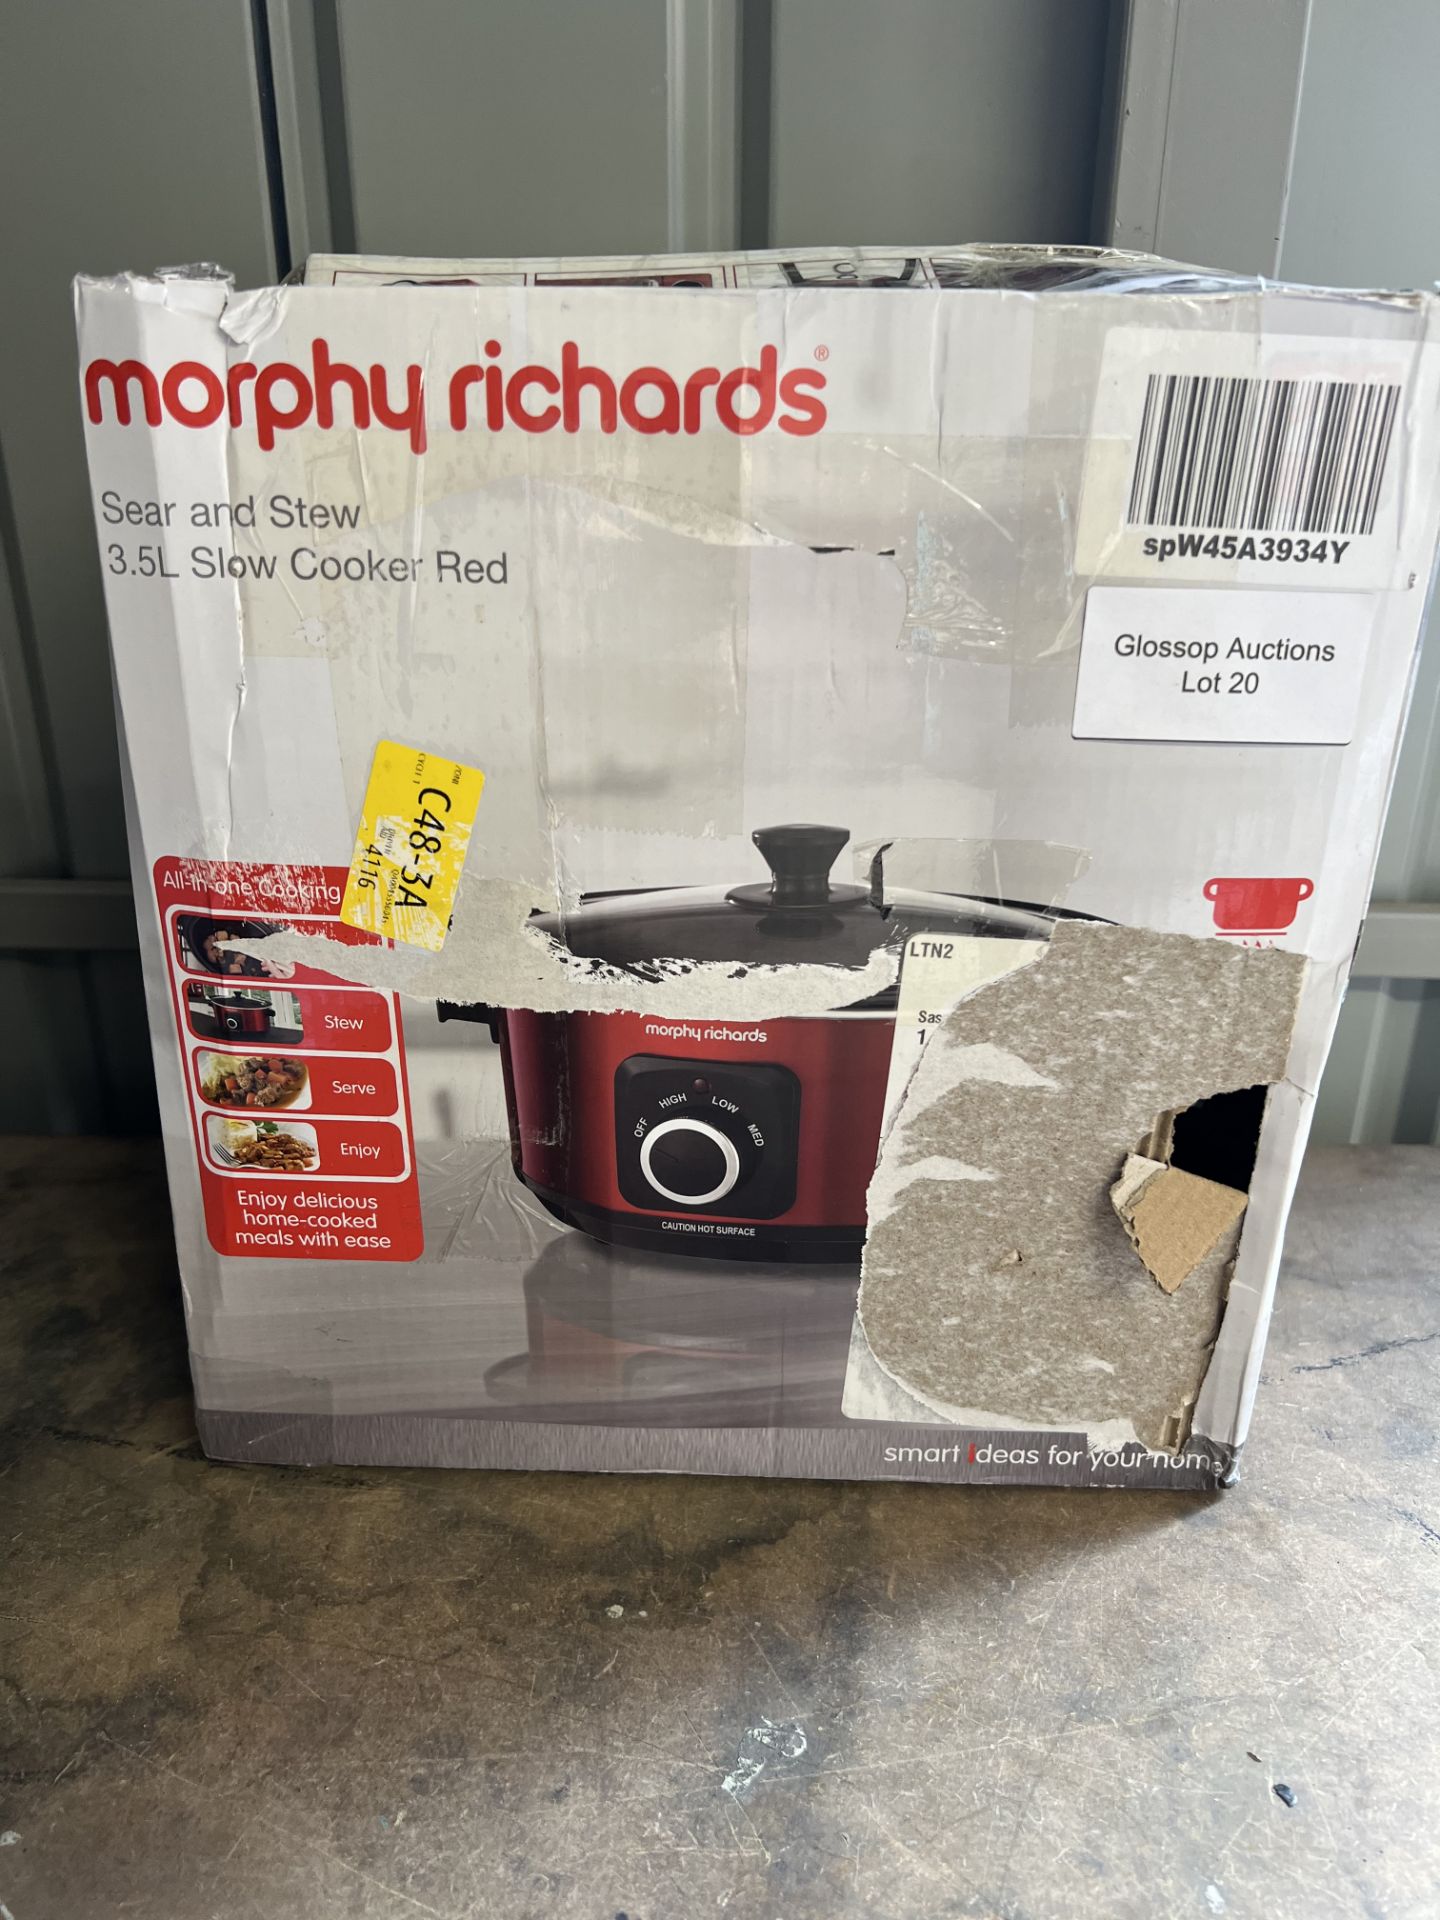 Morphy Richards Slow Cooker Sear and Stew 460014 3.5L Red Slow Cooker. RRP £44.99 - GRADE U - Image 2 of 2